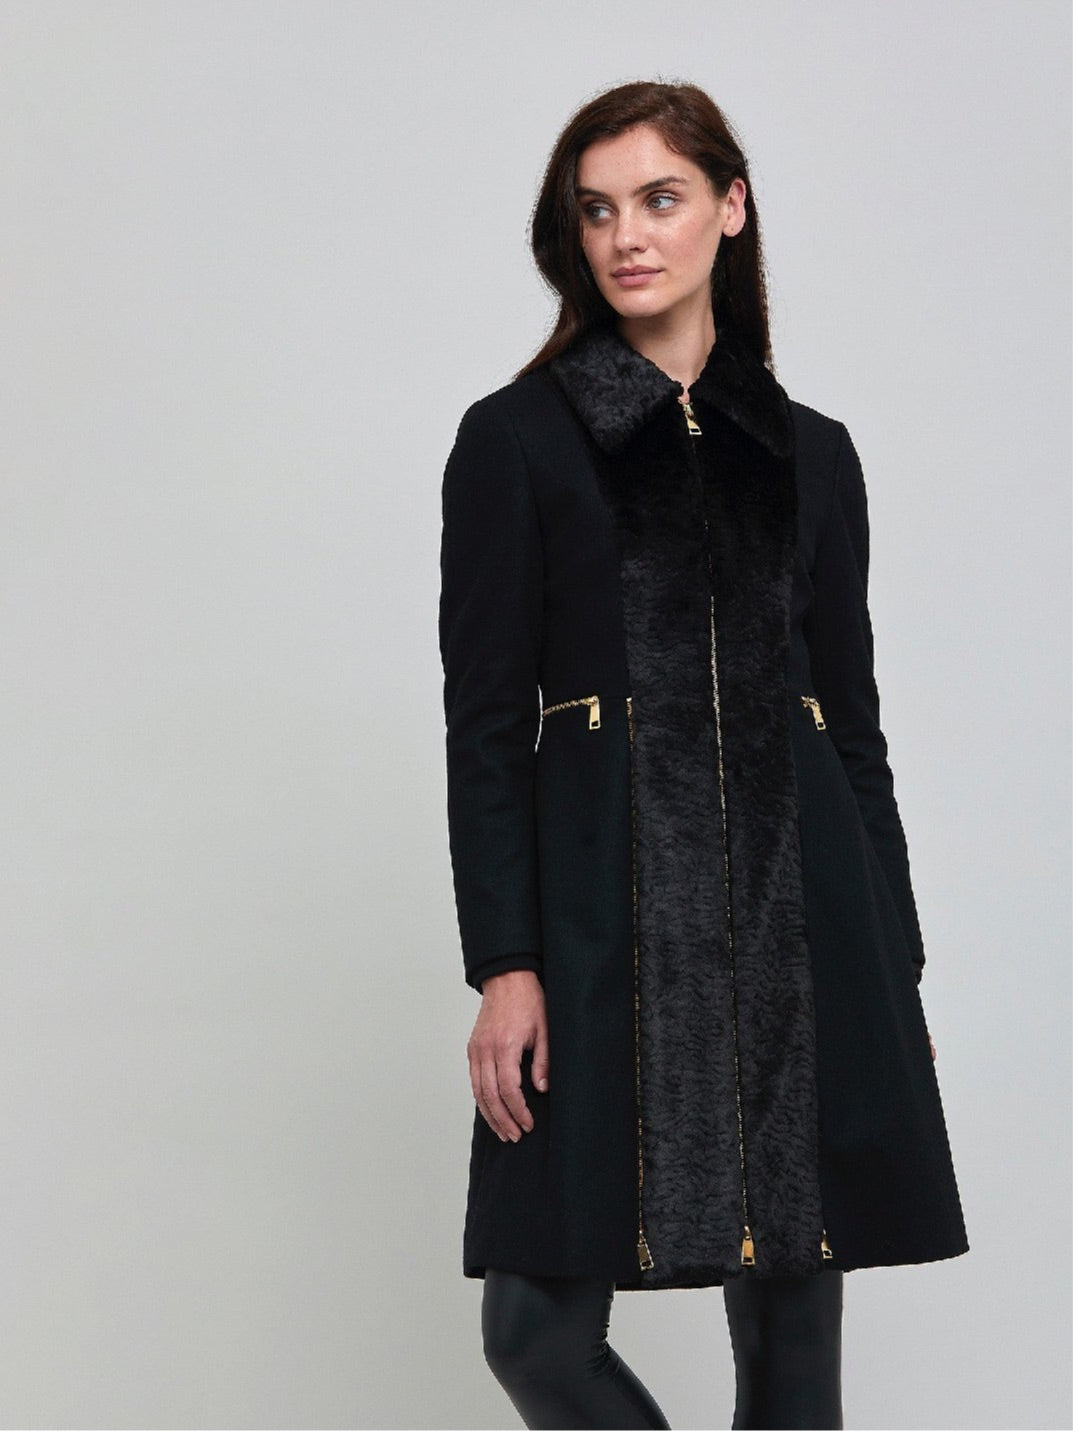 Elizabeth, true timeless sophistication in a black coat. An over-the-knee length coat made of cashmere blend, embellished with faux fur front panels and gold metal zippers, you will wear day after day.  Team with Belle or jill pant or for minimal style.